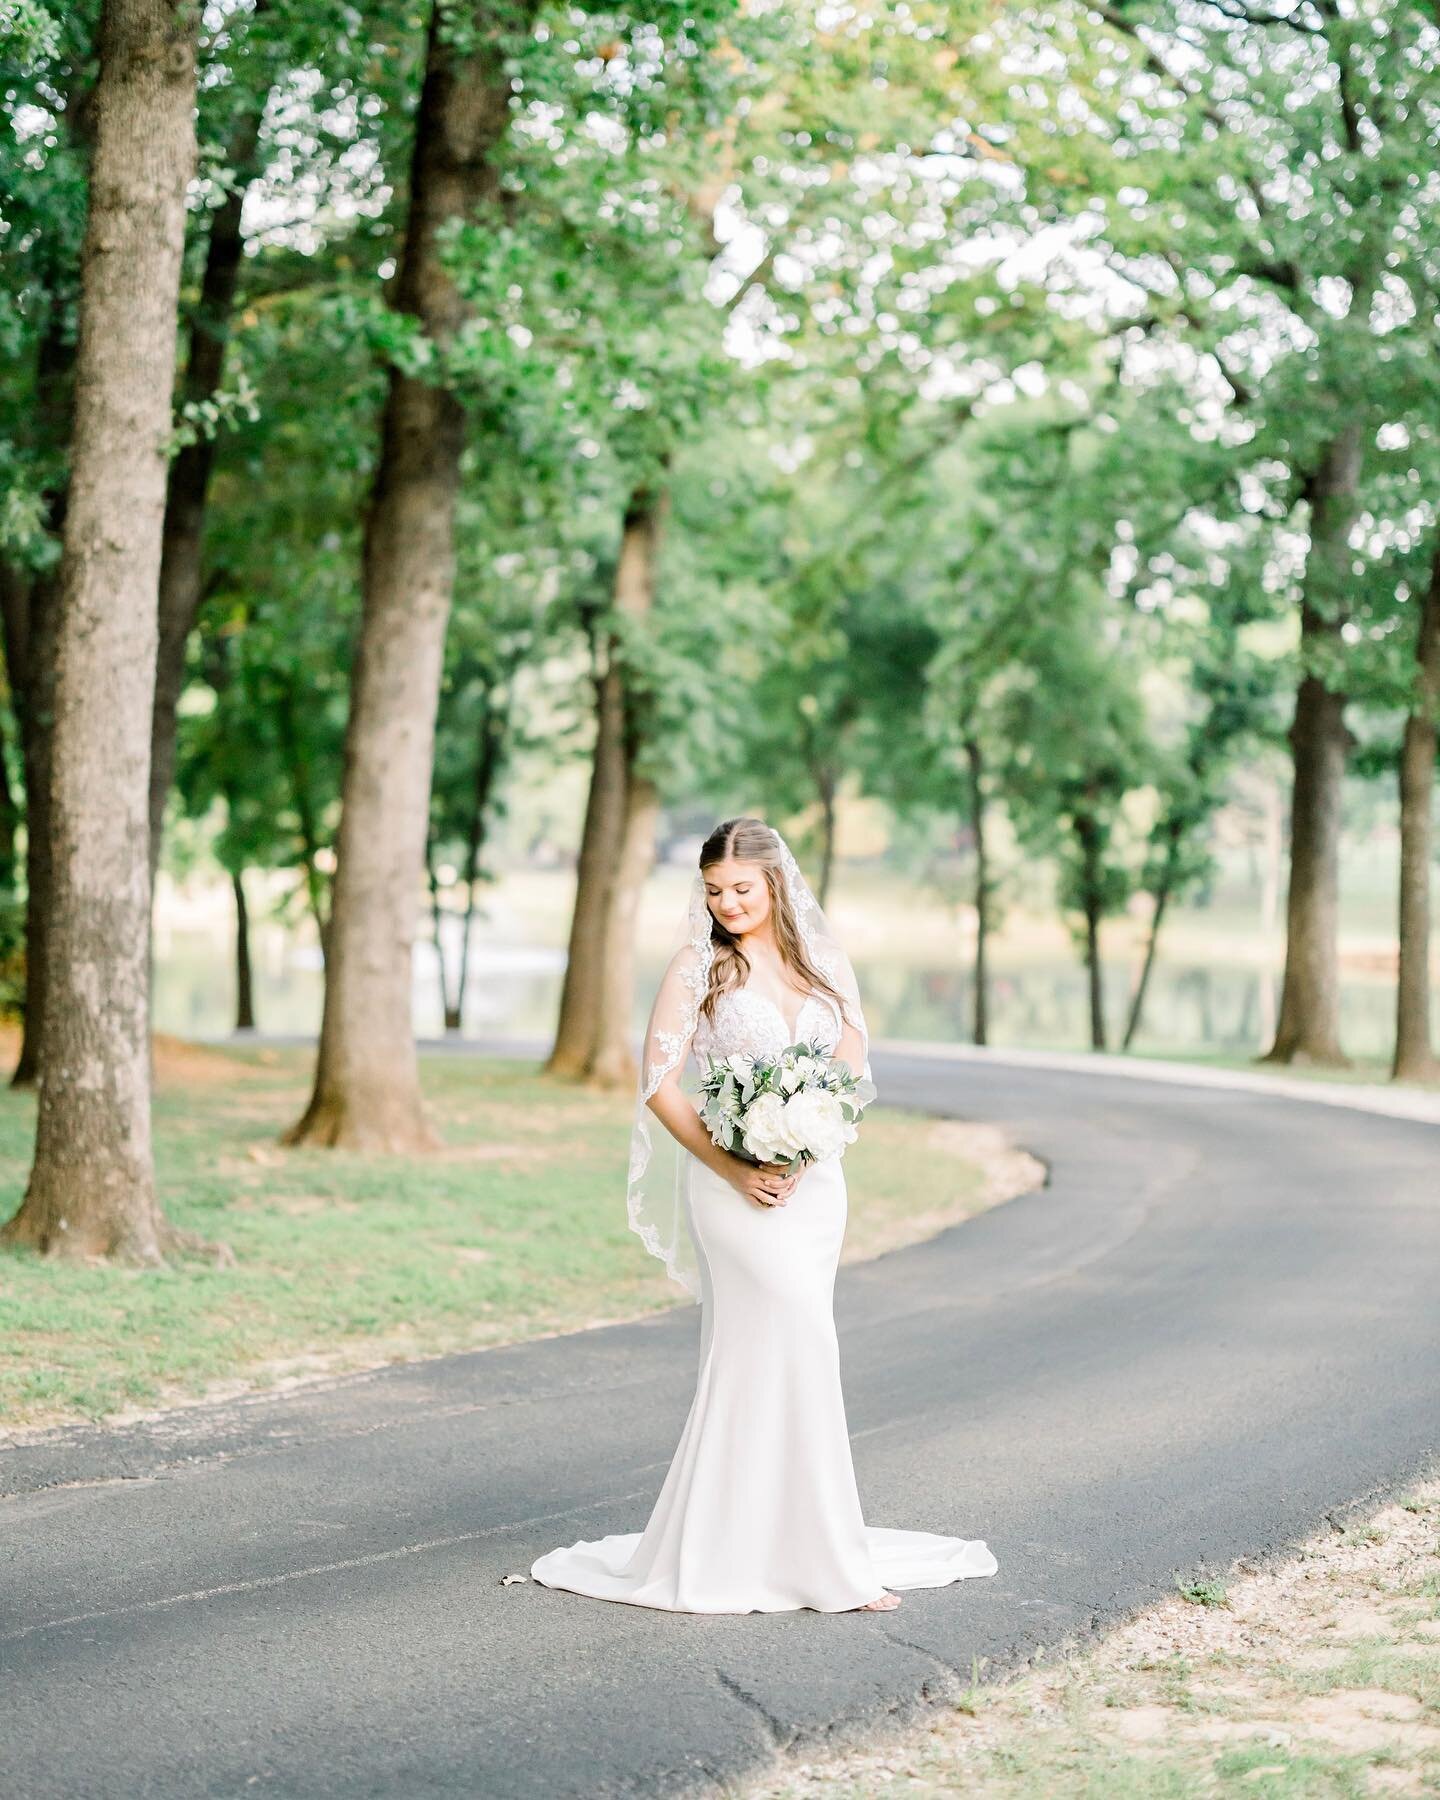 As much as we have loved our summer weddings, can fall get here faster? I can&rsquo;t wait to break our comfy sweaters! 

Florist: @malynmade 
Venue: @spainranch 
Makeup: @shainazeffmakeup 
Hair: @styled.by.chali 

#tulsaphotographer #tulsaweddings #